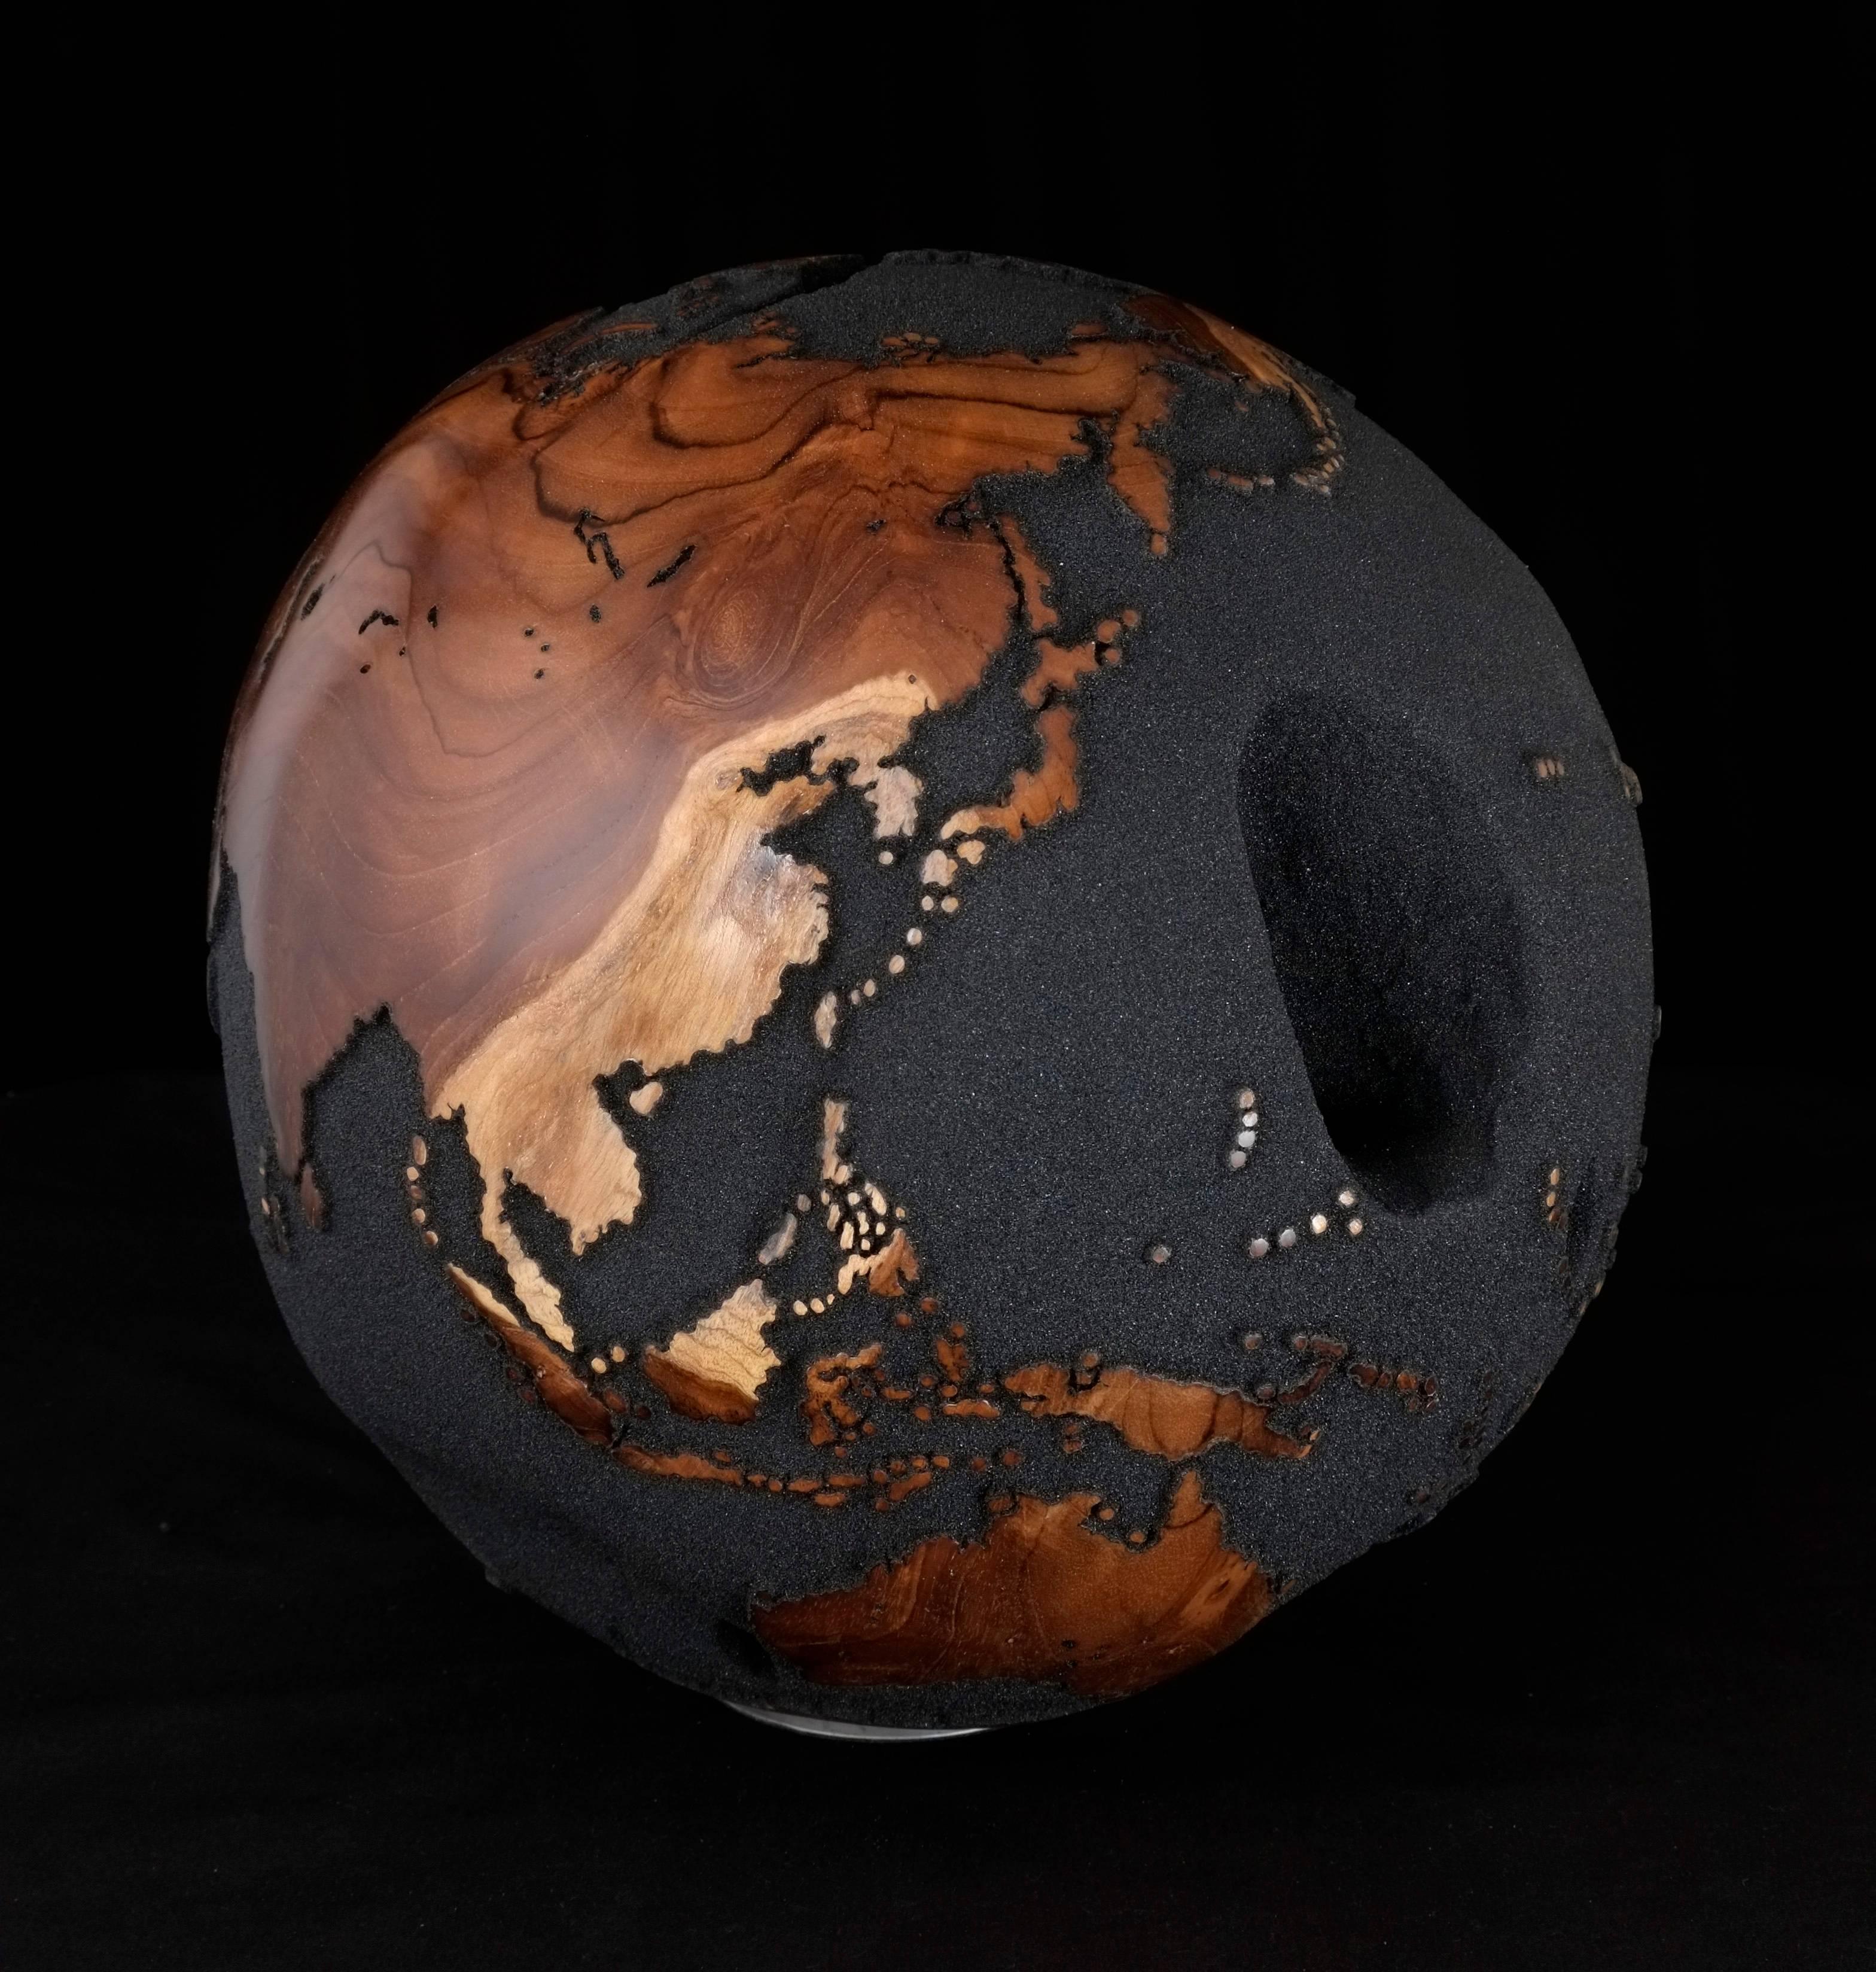 Organic Modern Contemporary Globe in Teak Root with Volcanic Sand and Natural Holes, 30cm